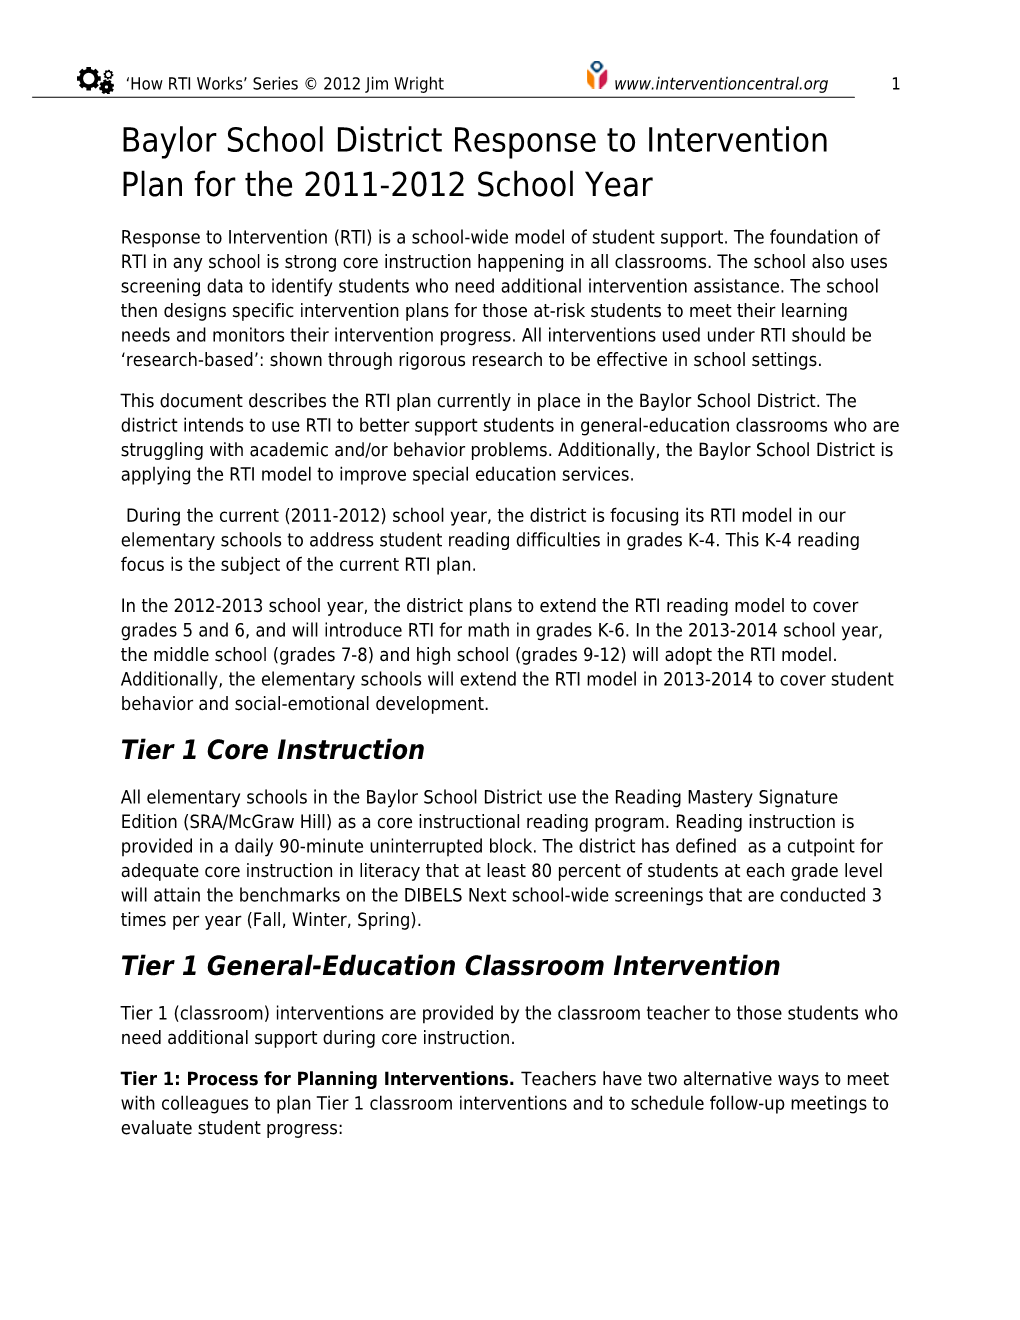 Baylor School District Response to Intervention Plan for the 2011-2012 School Year